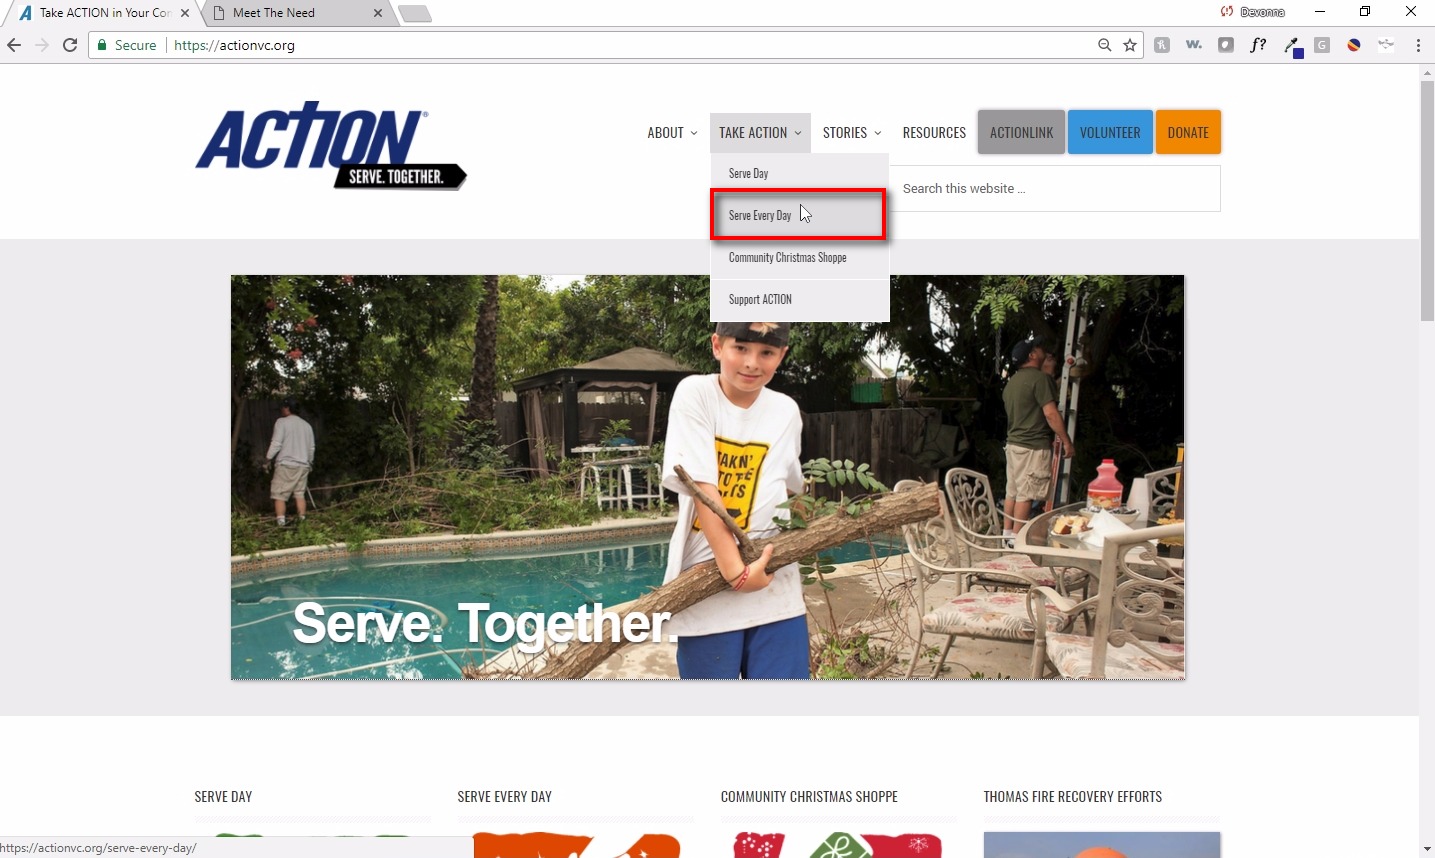 Click on Serve Every Day ;You can find your project on our website, ACTIONvc.org, on our Serve Every Day page. 